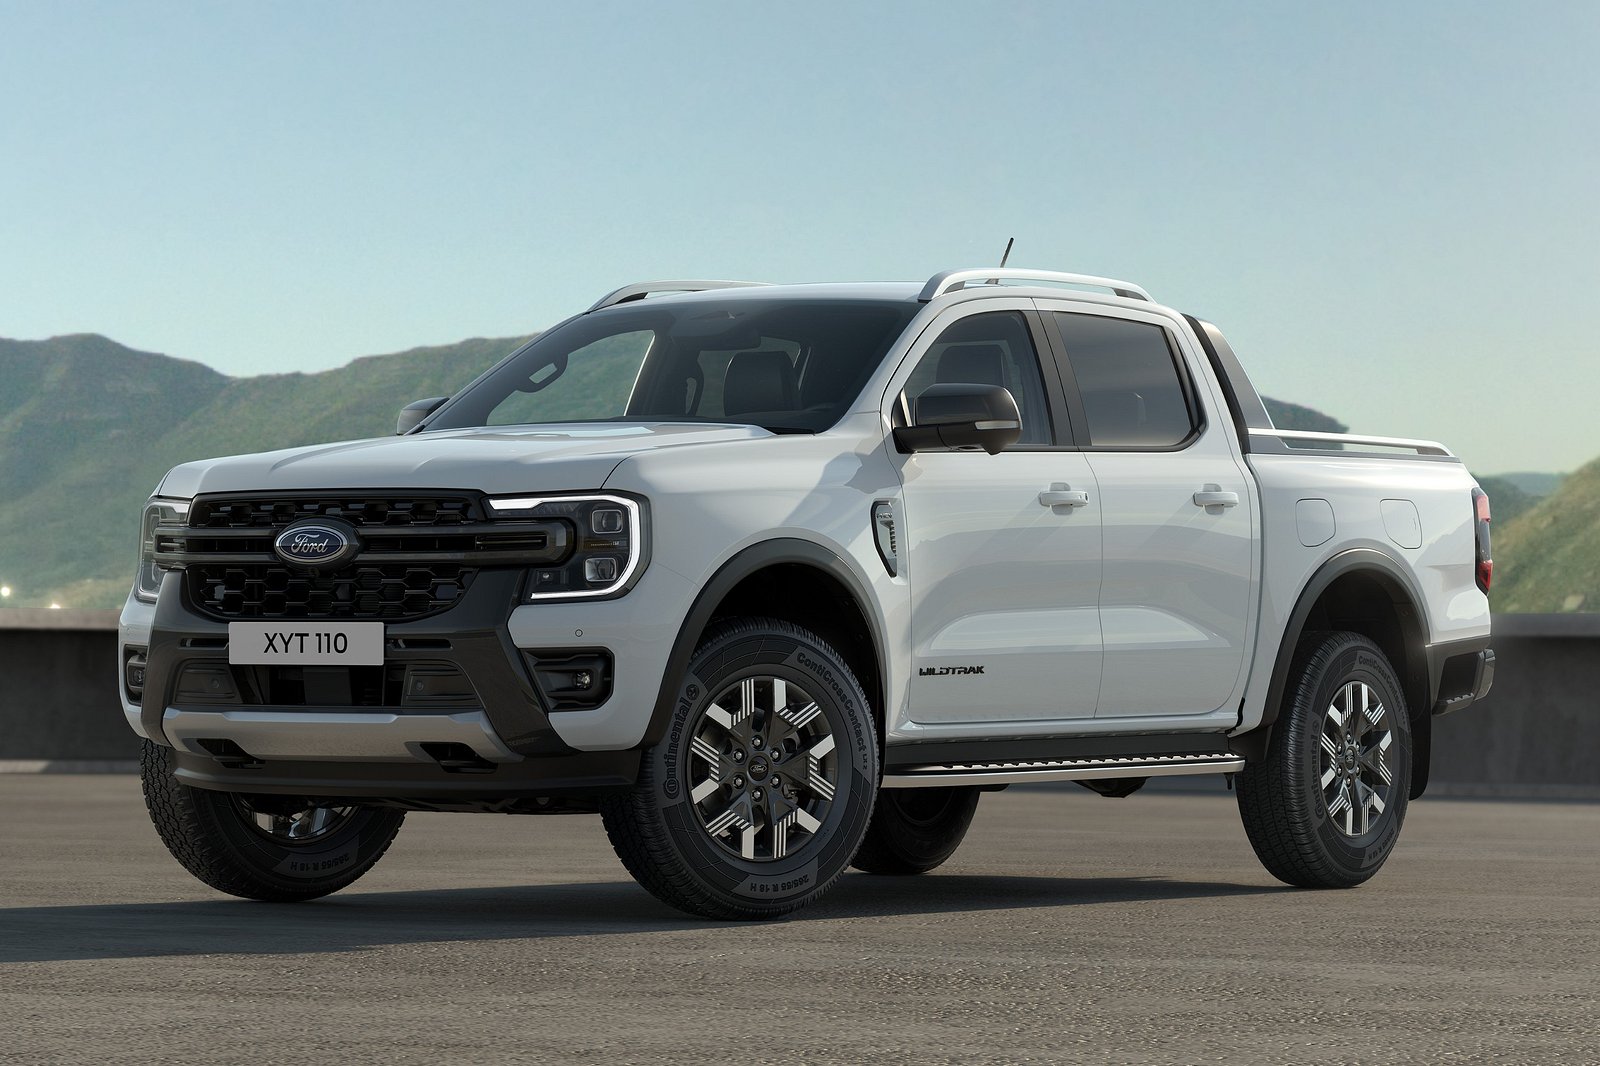 First-Ever Ford Ranger Plug-In Hybrid Revealed With 28-Mile